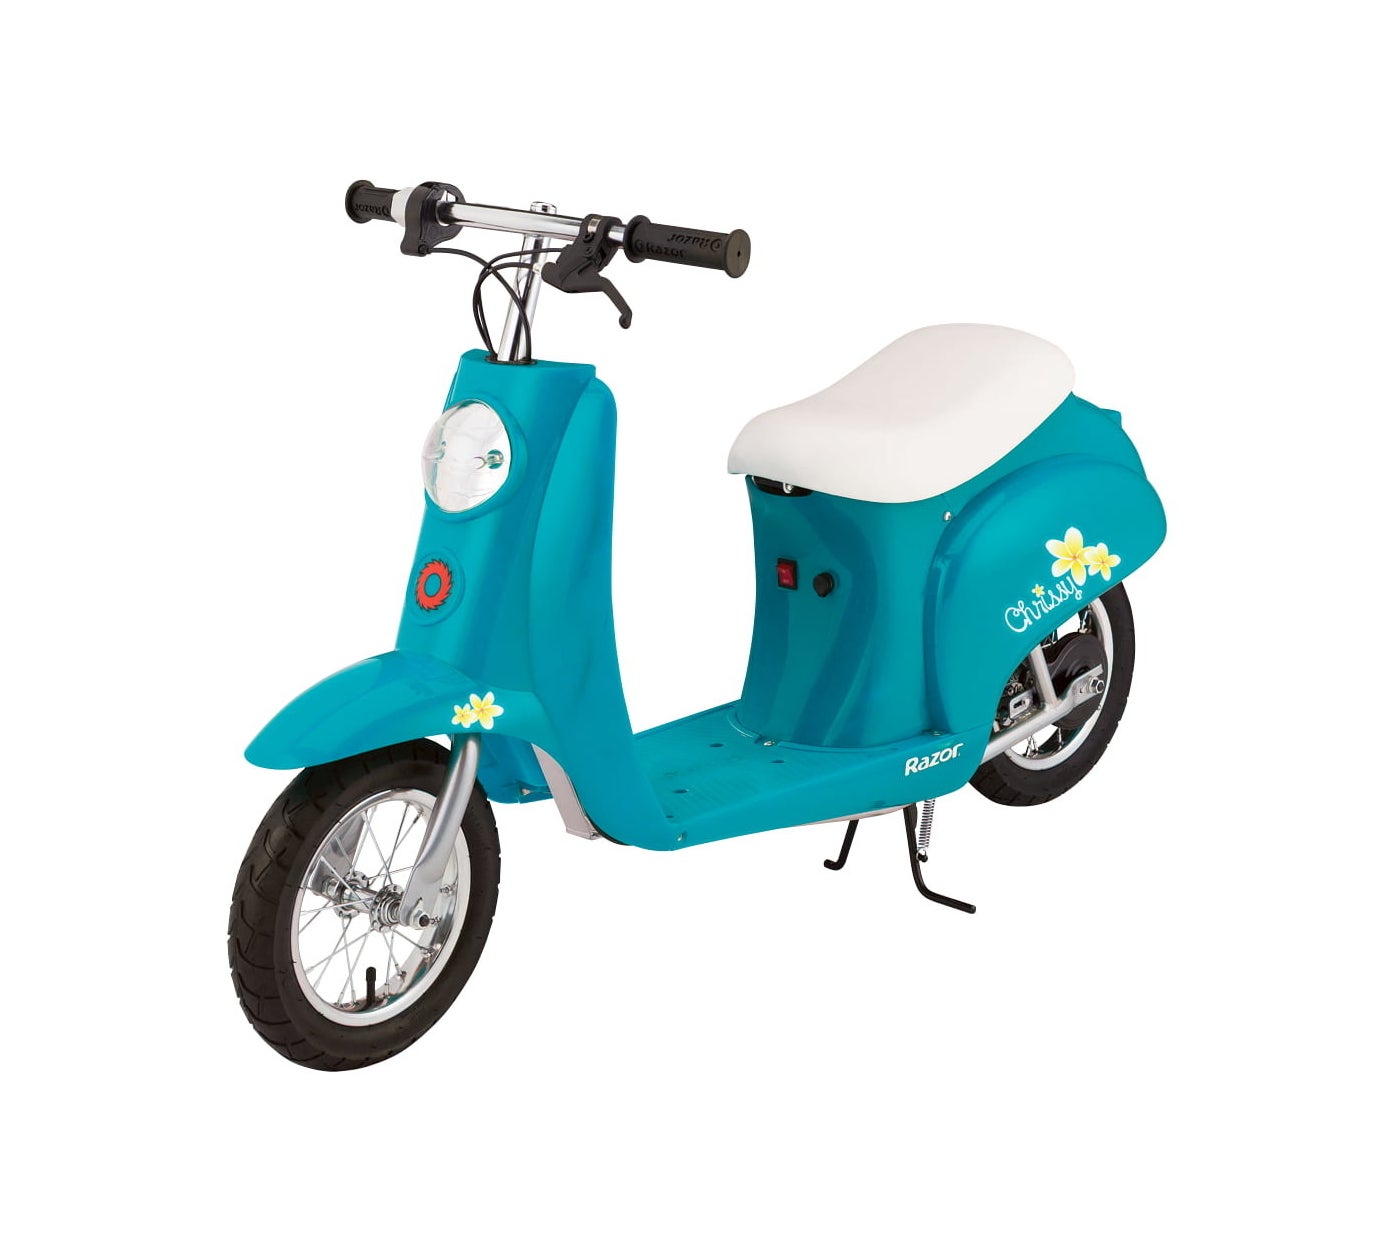 the scooter in green